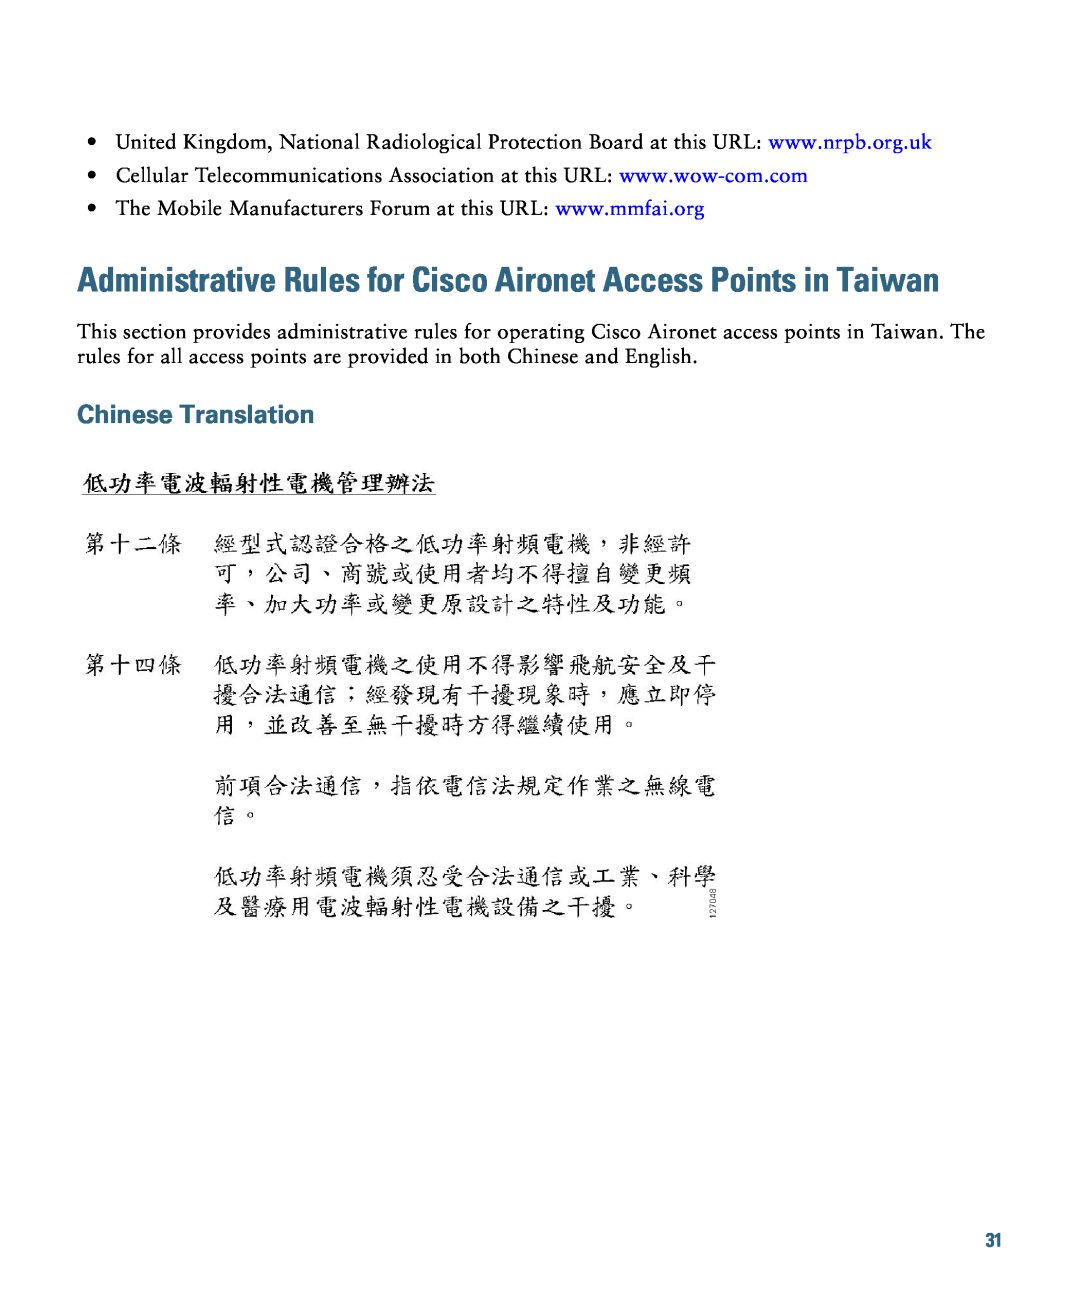 Cisco Systems AIRCAP2602IAK9, 2600 Administrative Rules for Cisco Aironet Access Points in Taiwan, Chinese Translation 